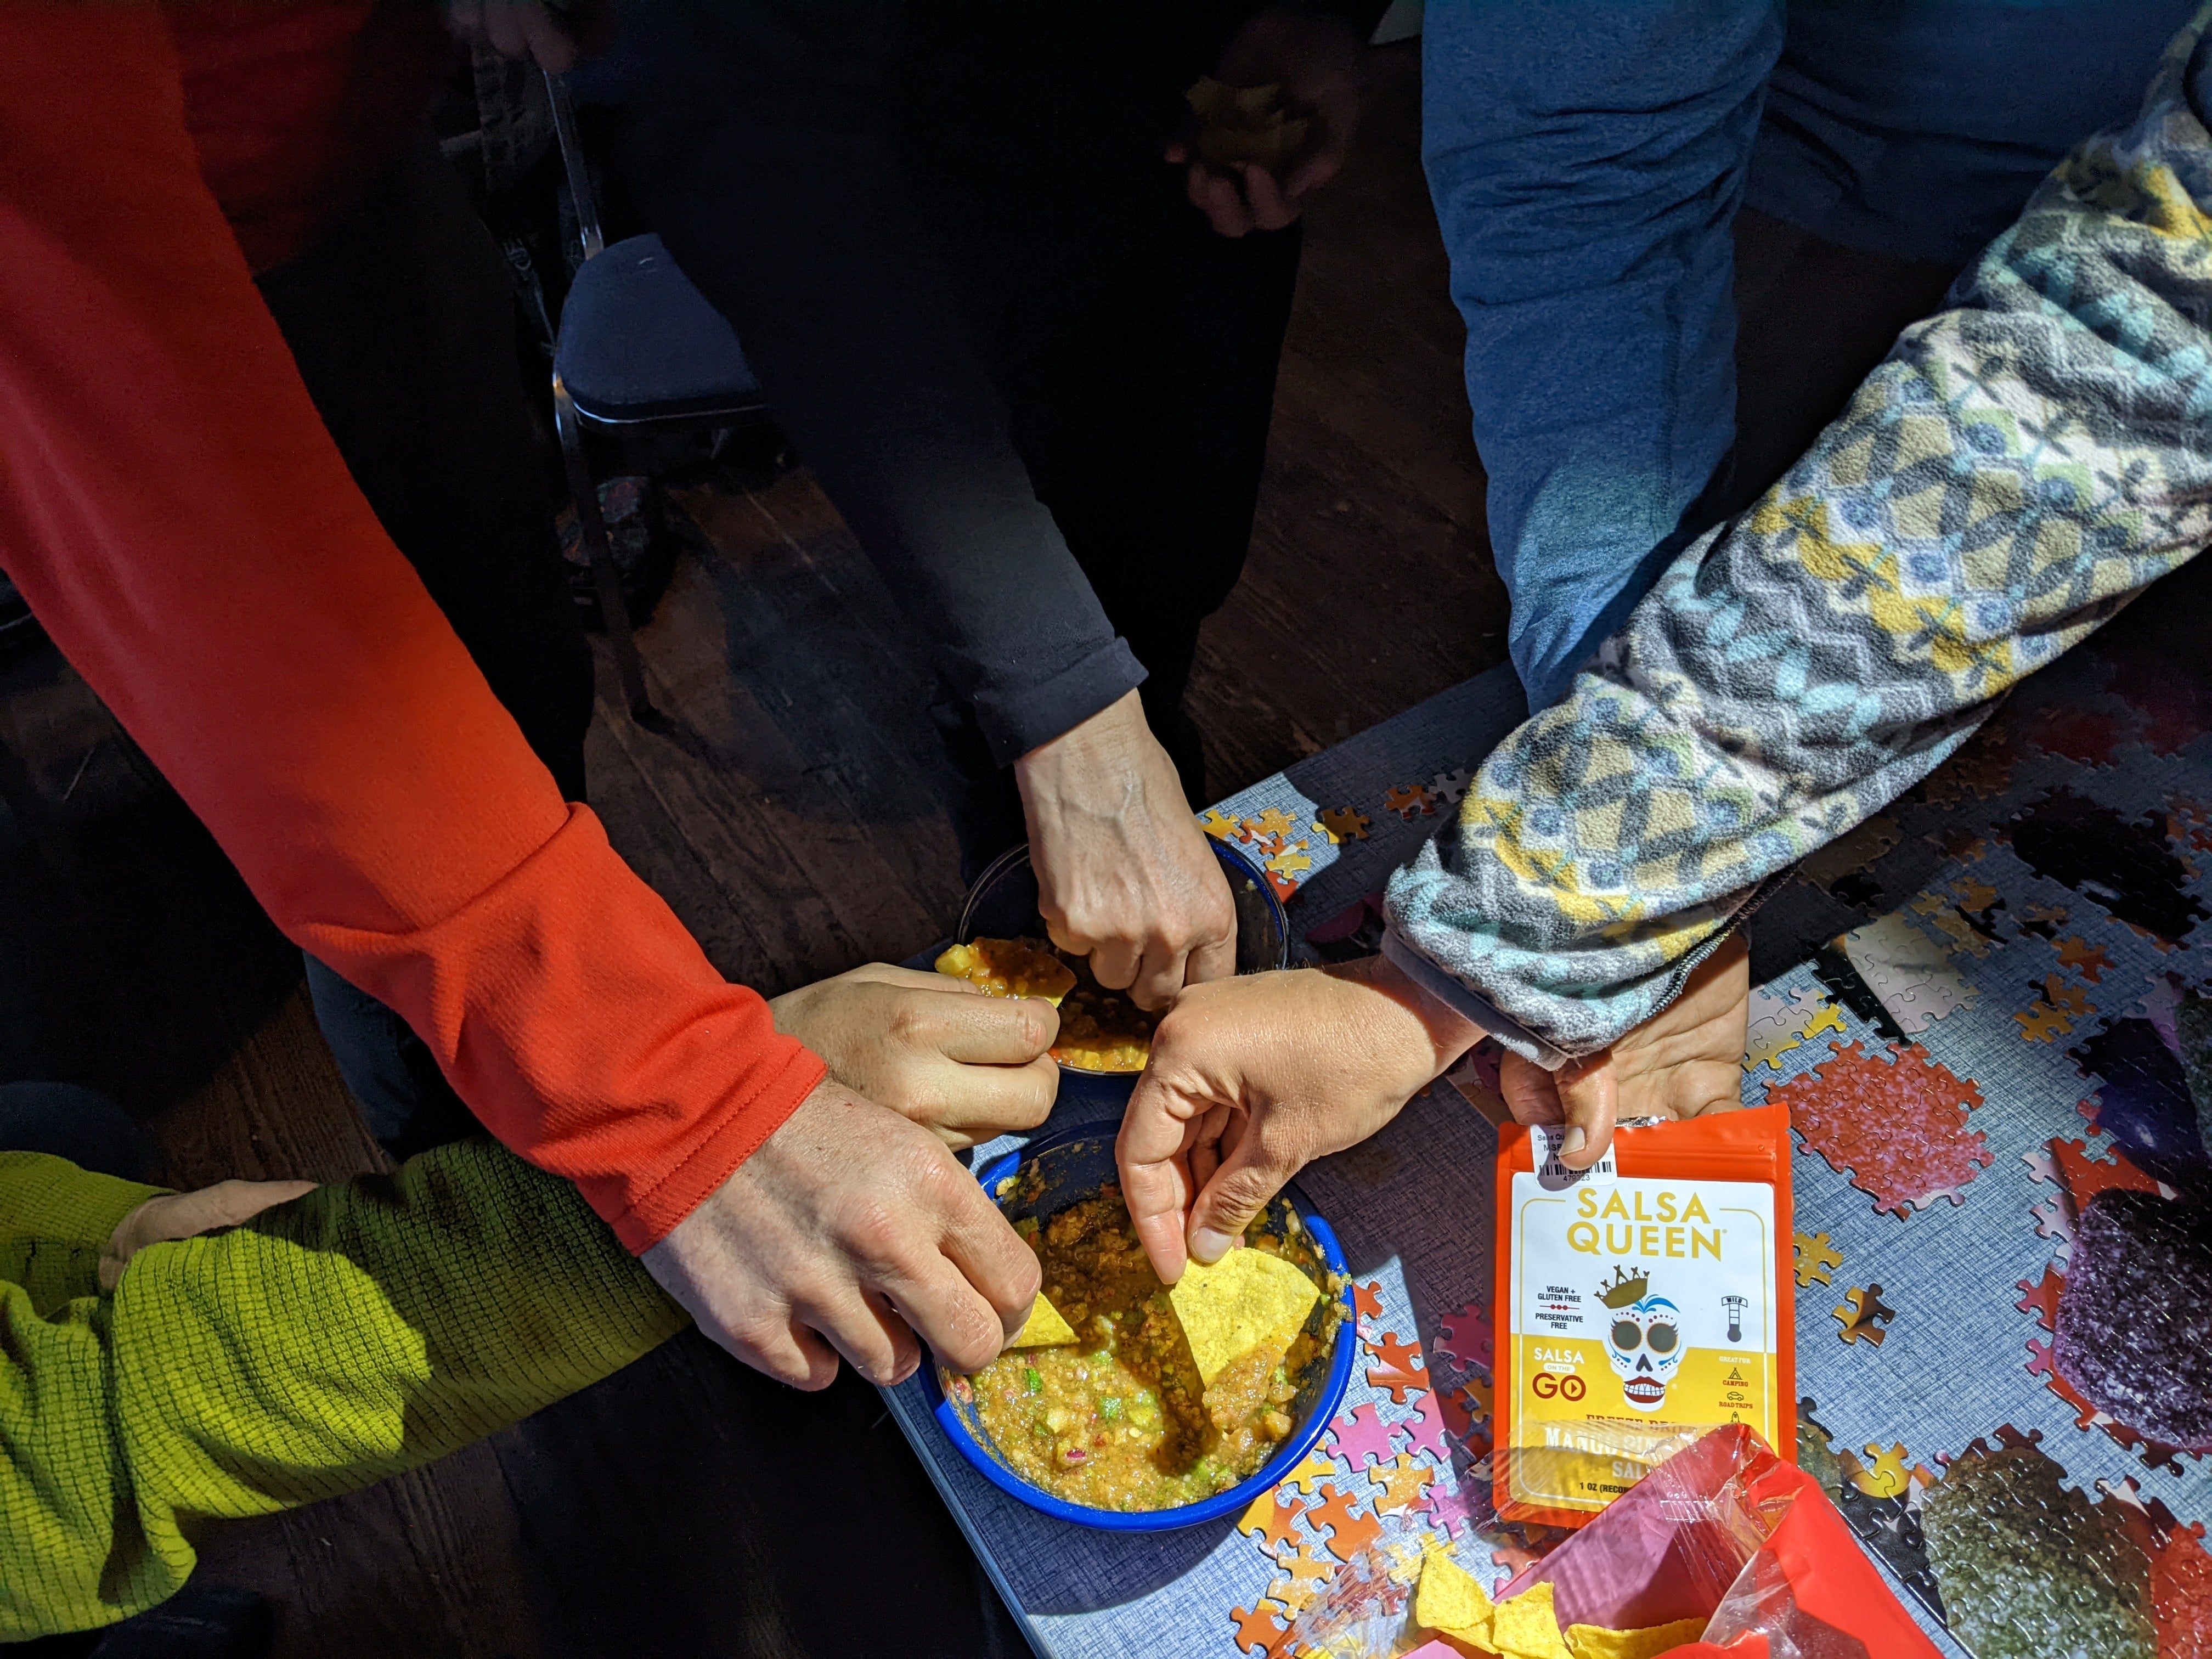 A group of hikers eating chips and salsa